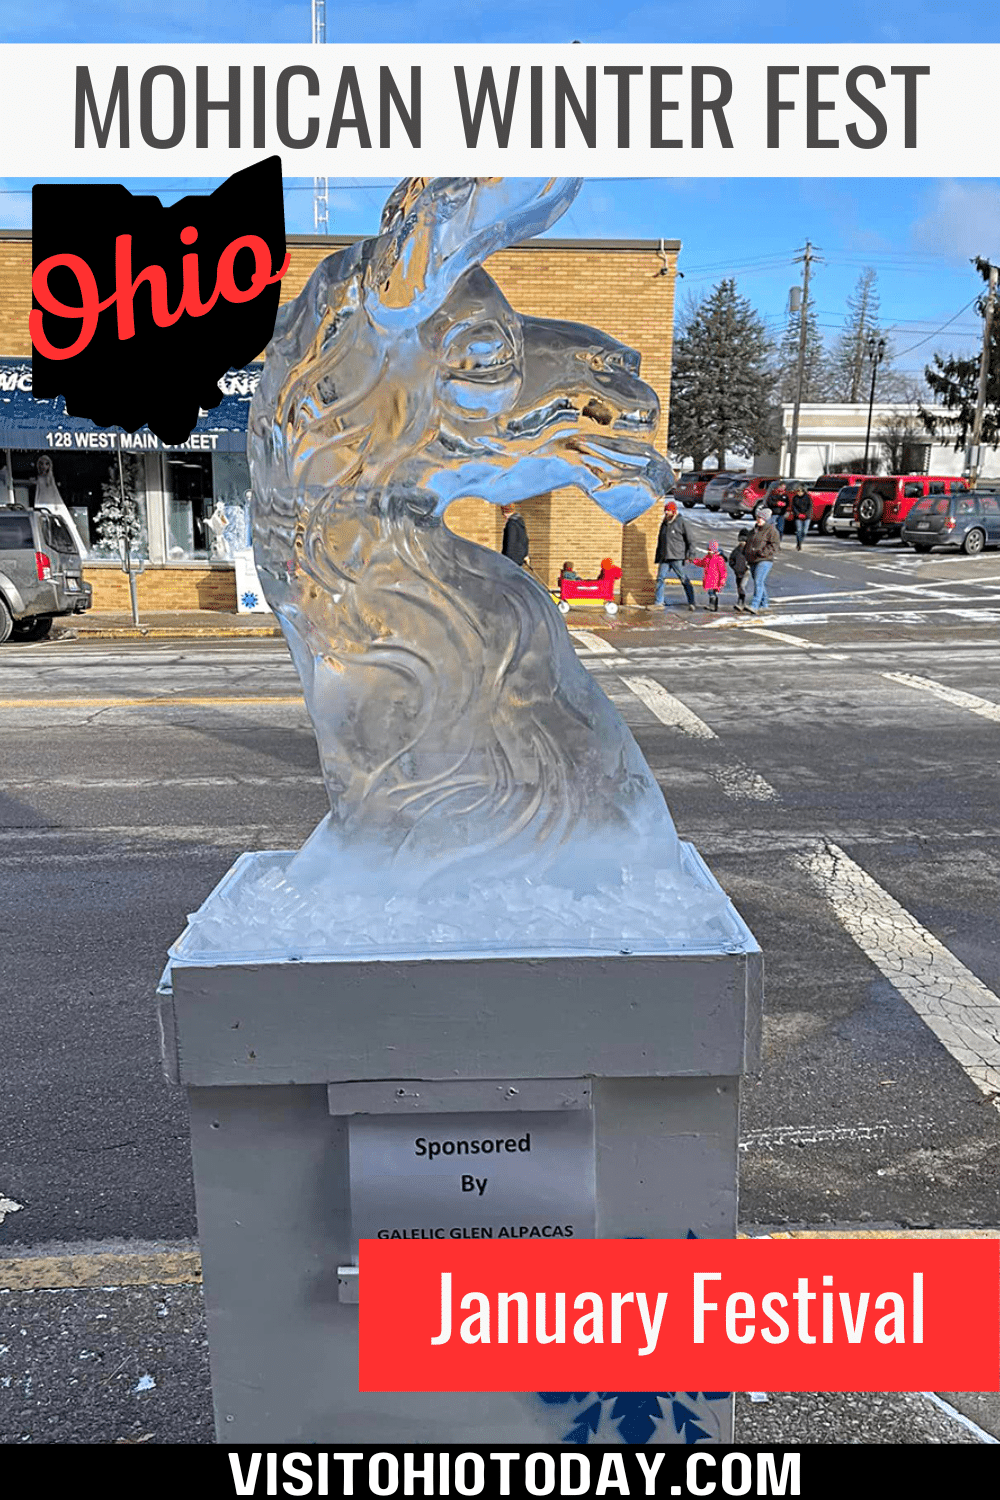 Mohican Winter Fest is an annual winter festival in Loudonville that centers around ice sculpting and train displays. This festival is held in mid-January.